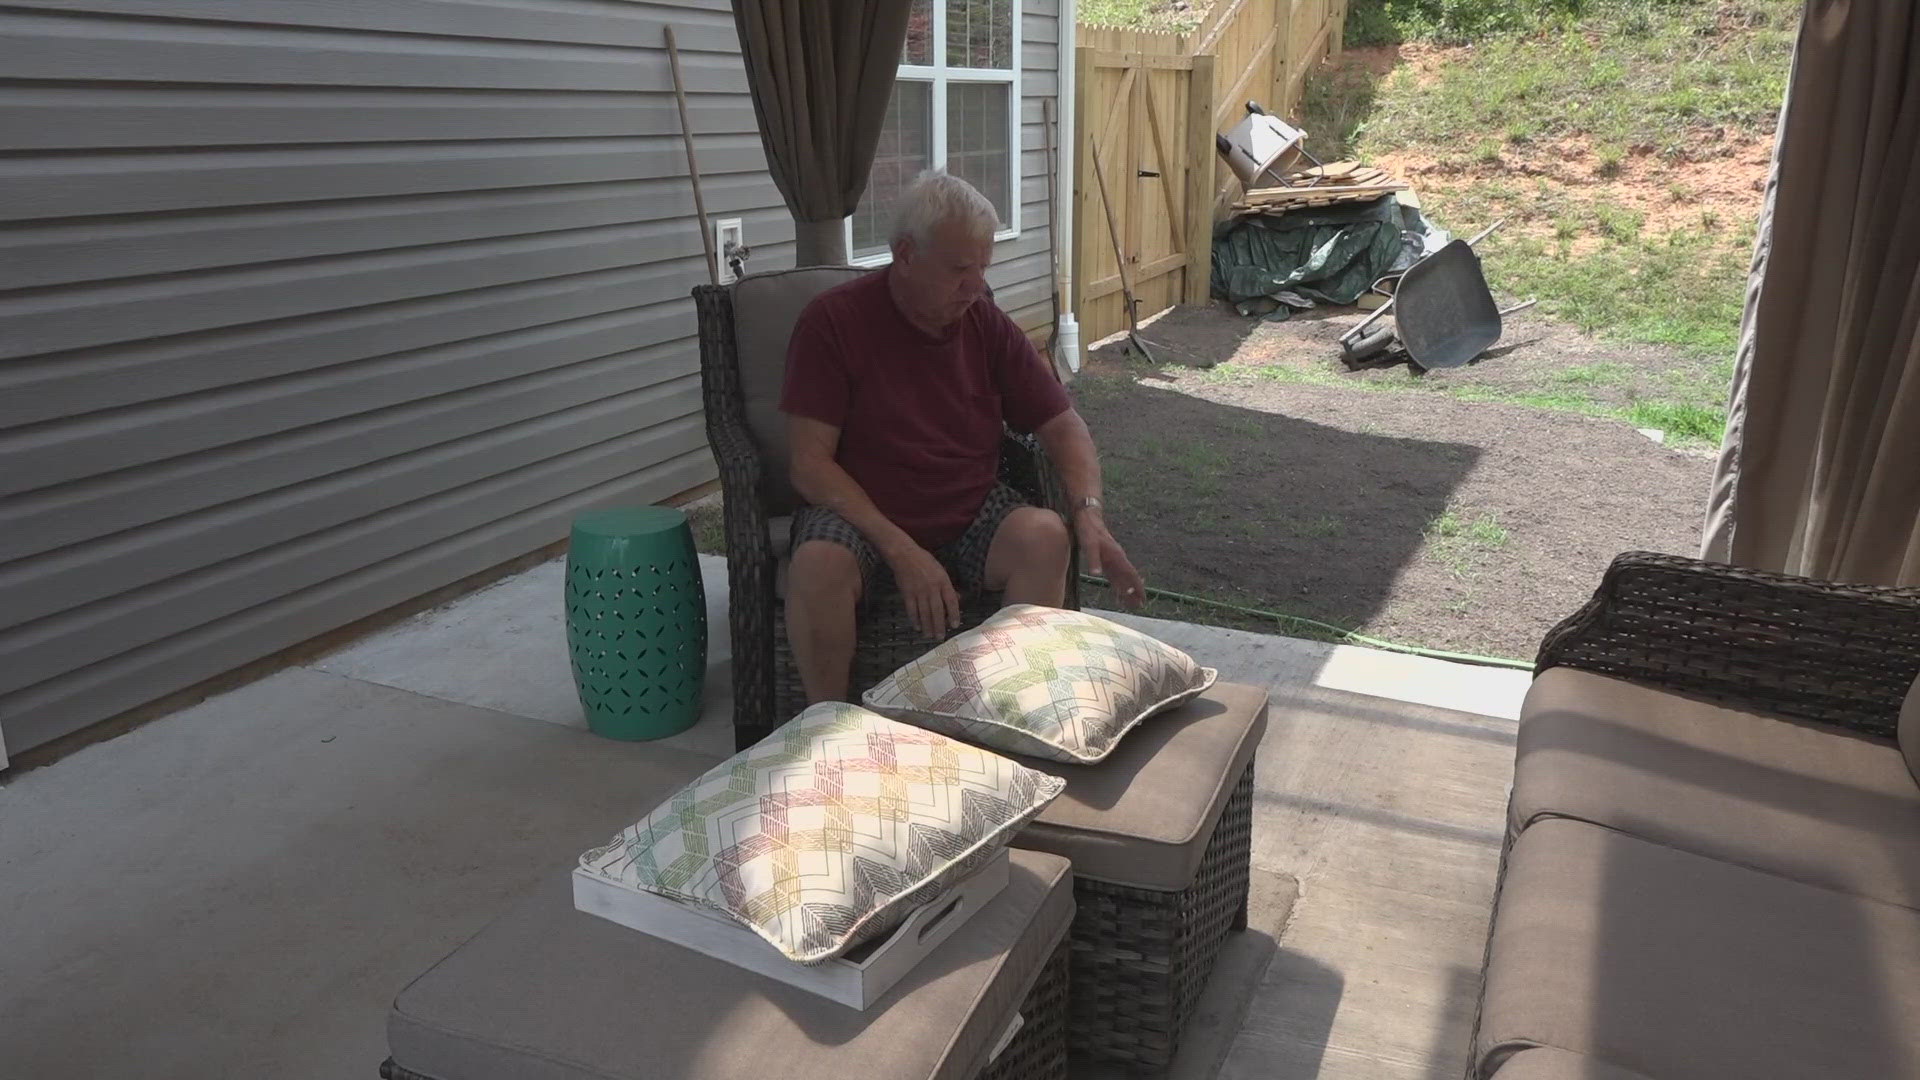 Norman Bourassa was ready to revamp his yard. The work made that a challenge.